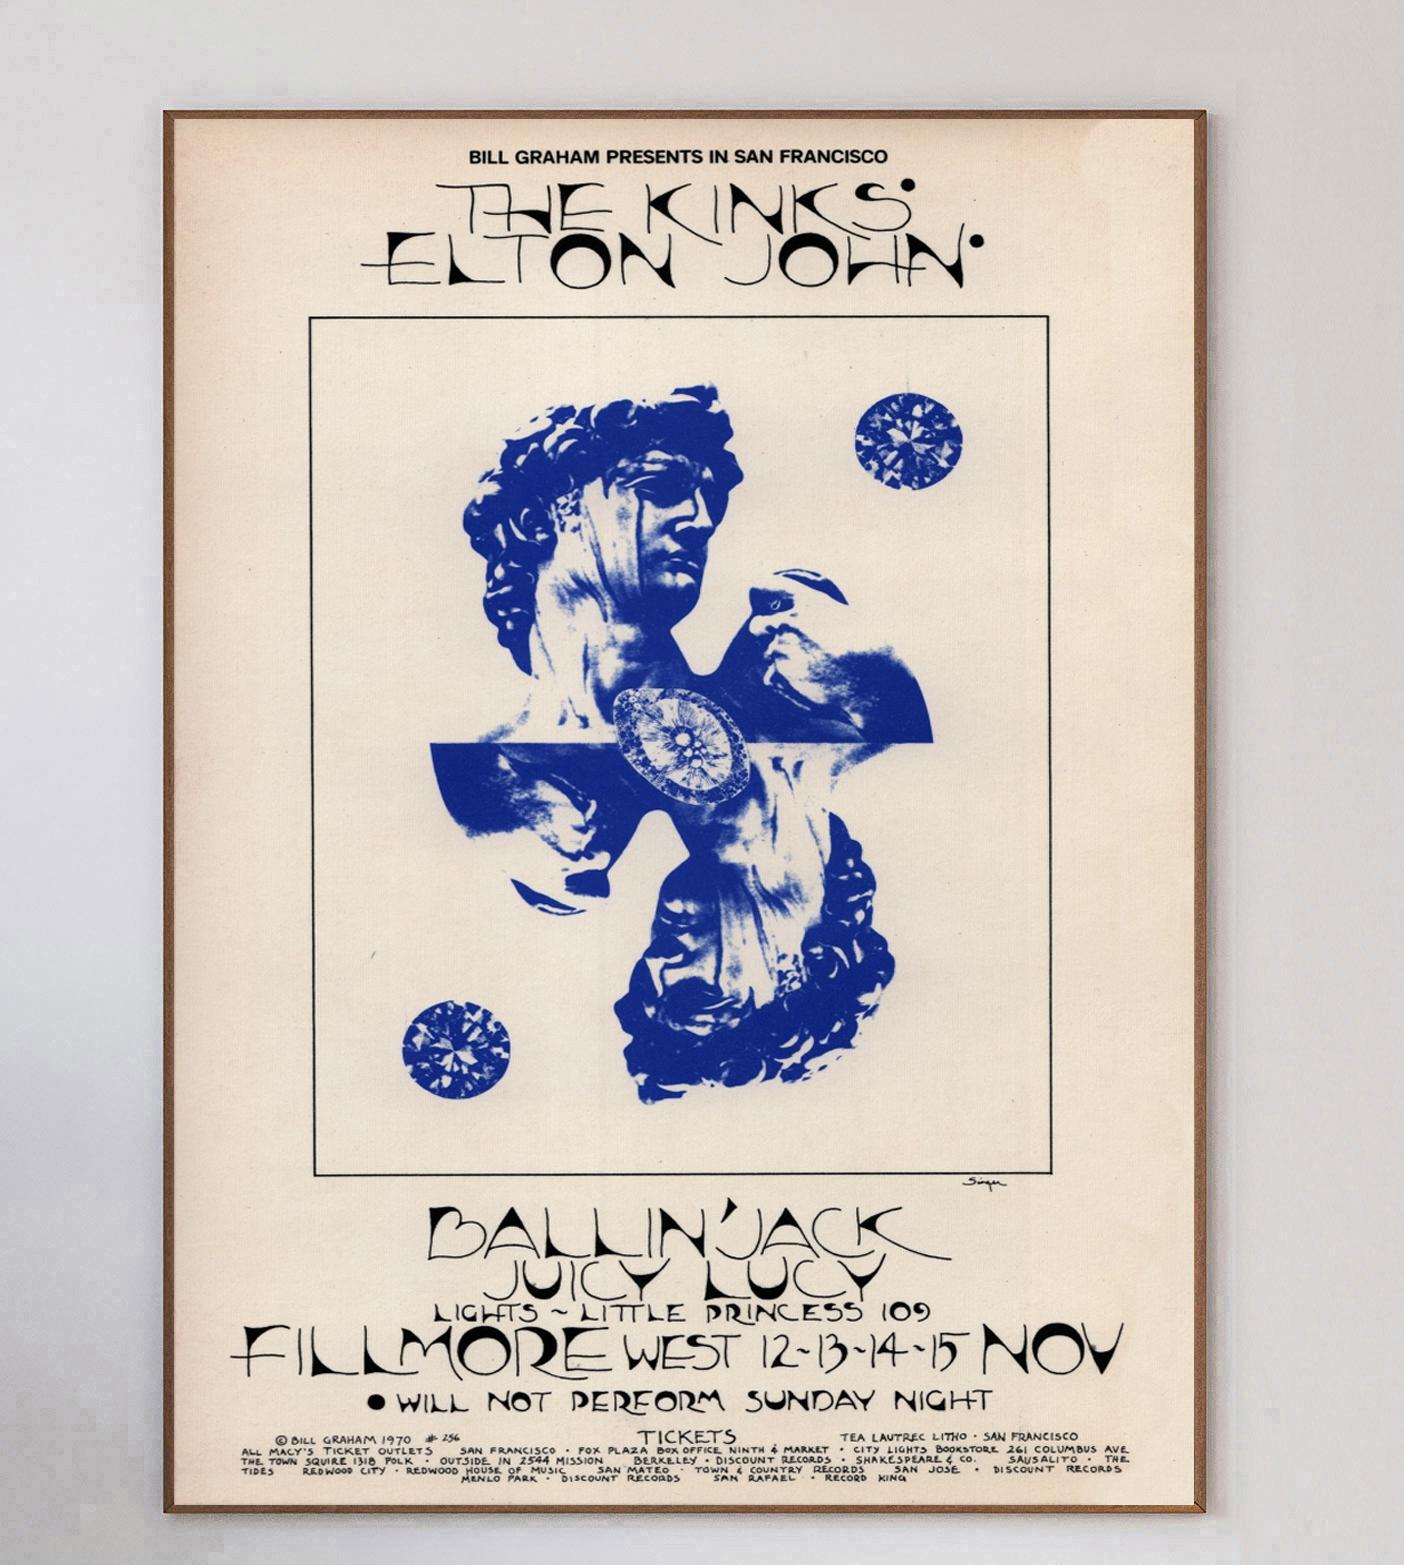 Designed by concert poster artist David Singer, this beautiful poster was created in 1970 to promote a live concert of The Kinks & Elton John at the world famous Fillmore West in San Francisco. Bill Graham events such as this were well known for